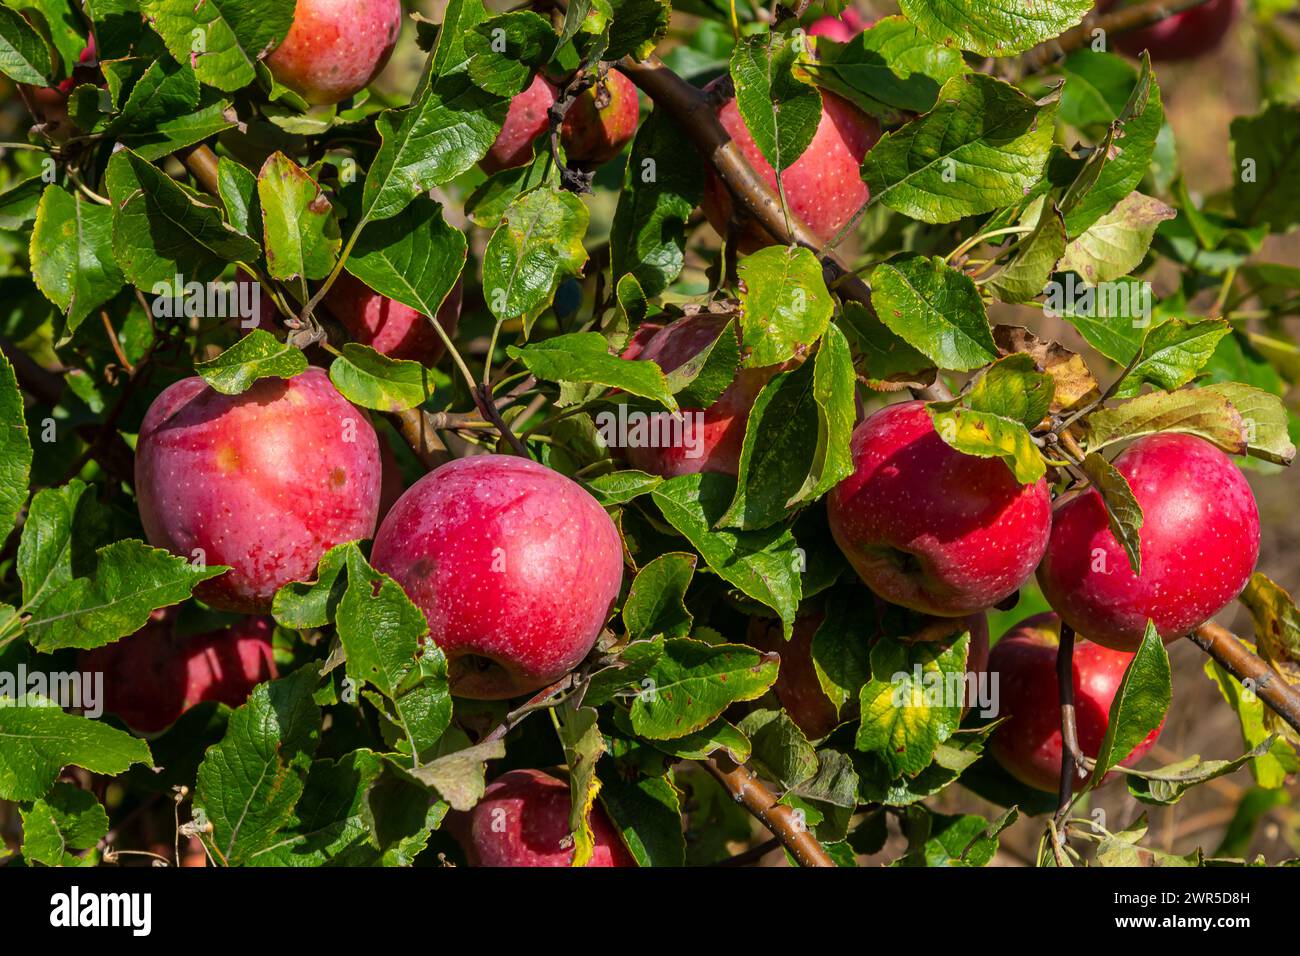 Autumn day. Rural garden. In the frame ripe red apples on a tree. It's raining Photographed in Ukraine, Stock Photo